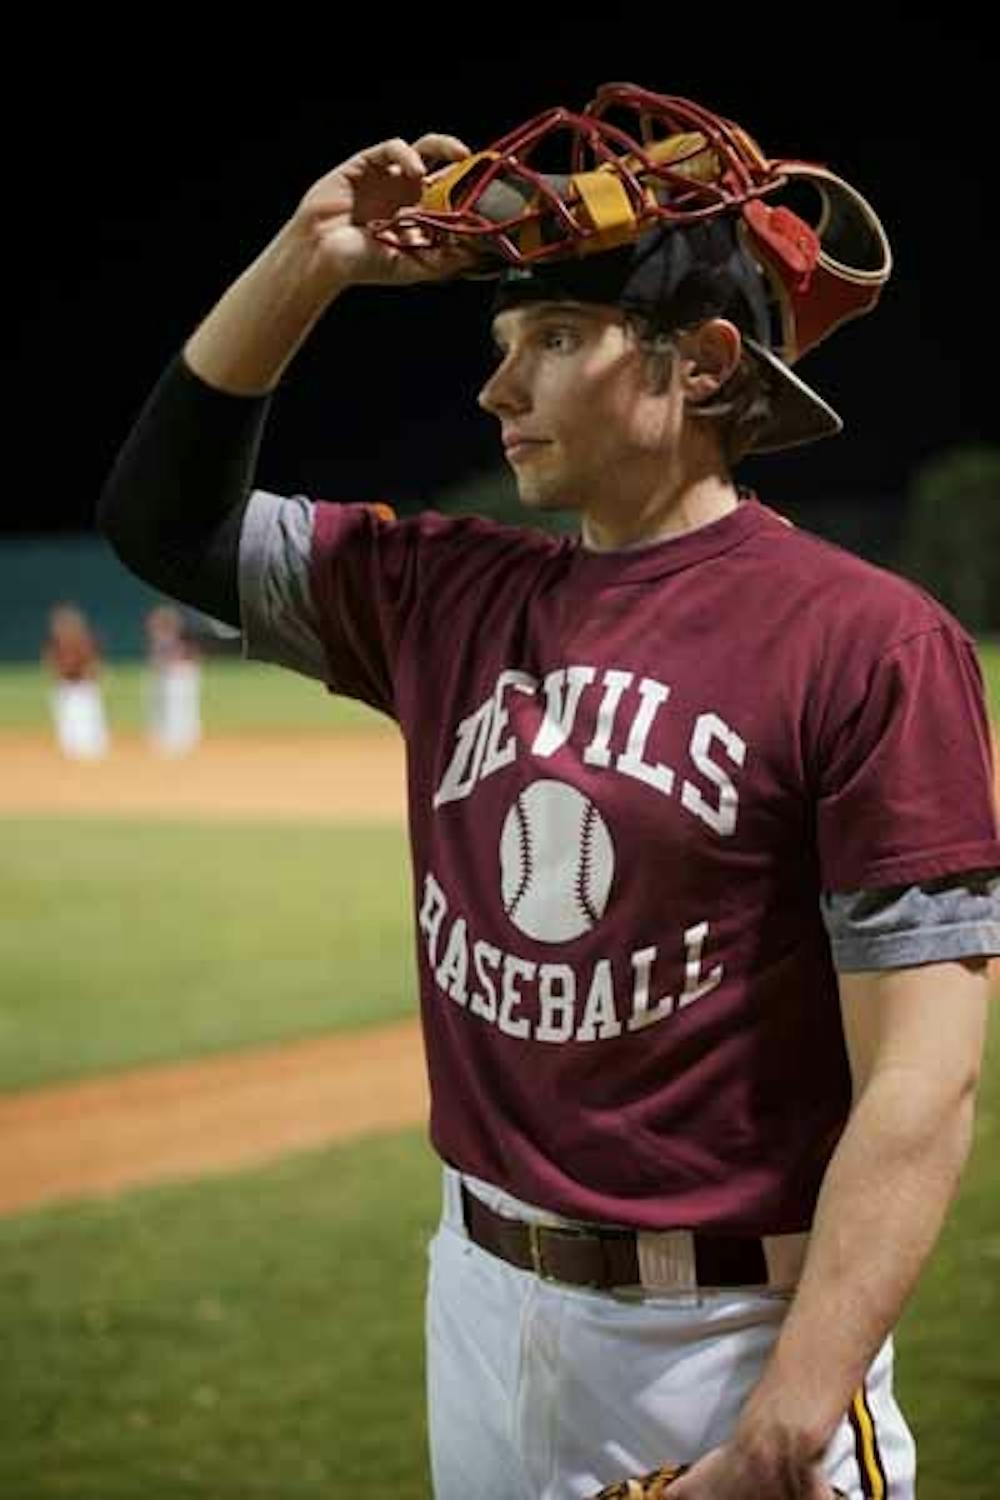 PREPERATION: Senior catcher Nick Morreale takes a break during the ASU club baseball team’s practice Tuesday night. The Sun Devils are working to mix new talent in with their already-experienced roster. (Photo by Michael Arellano)